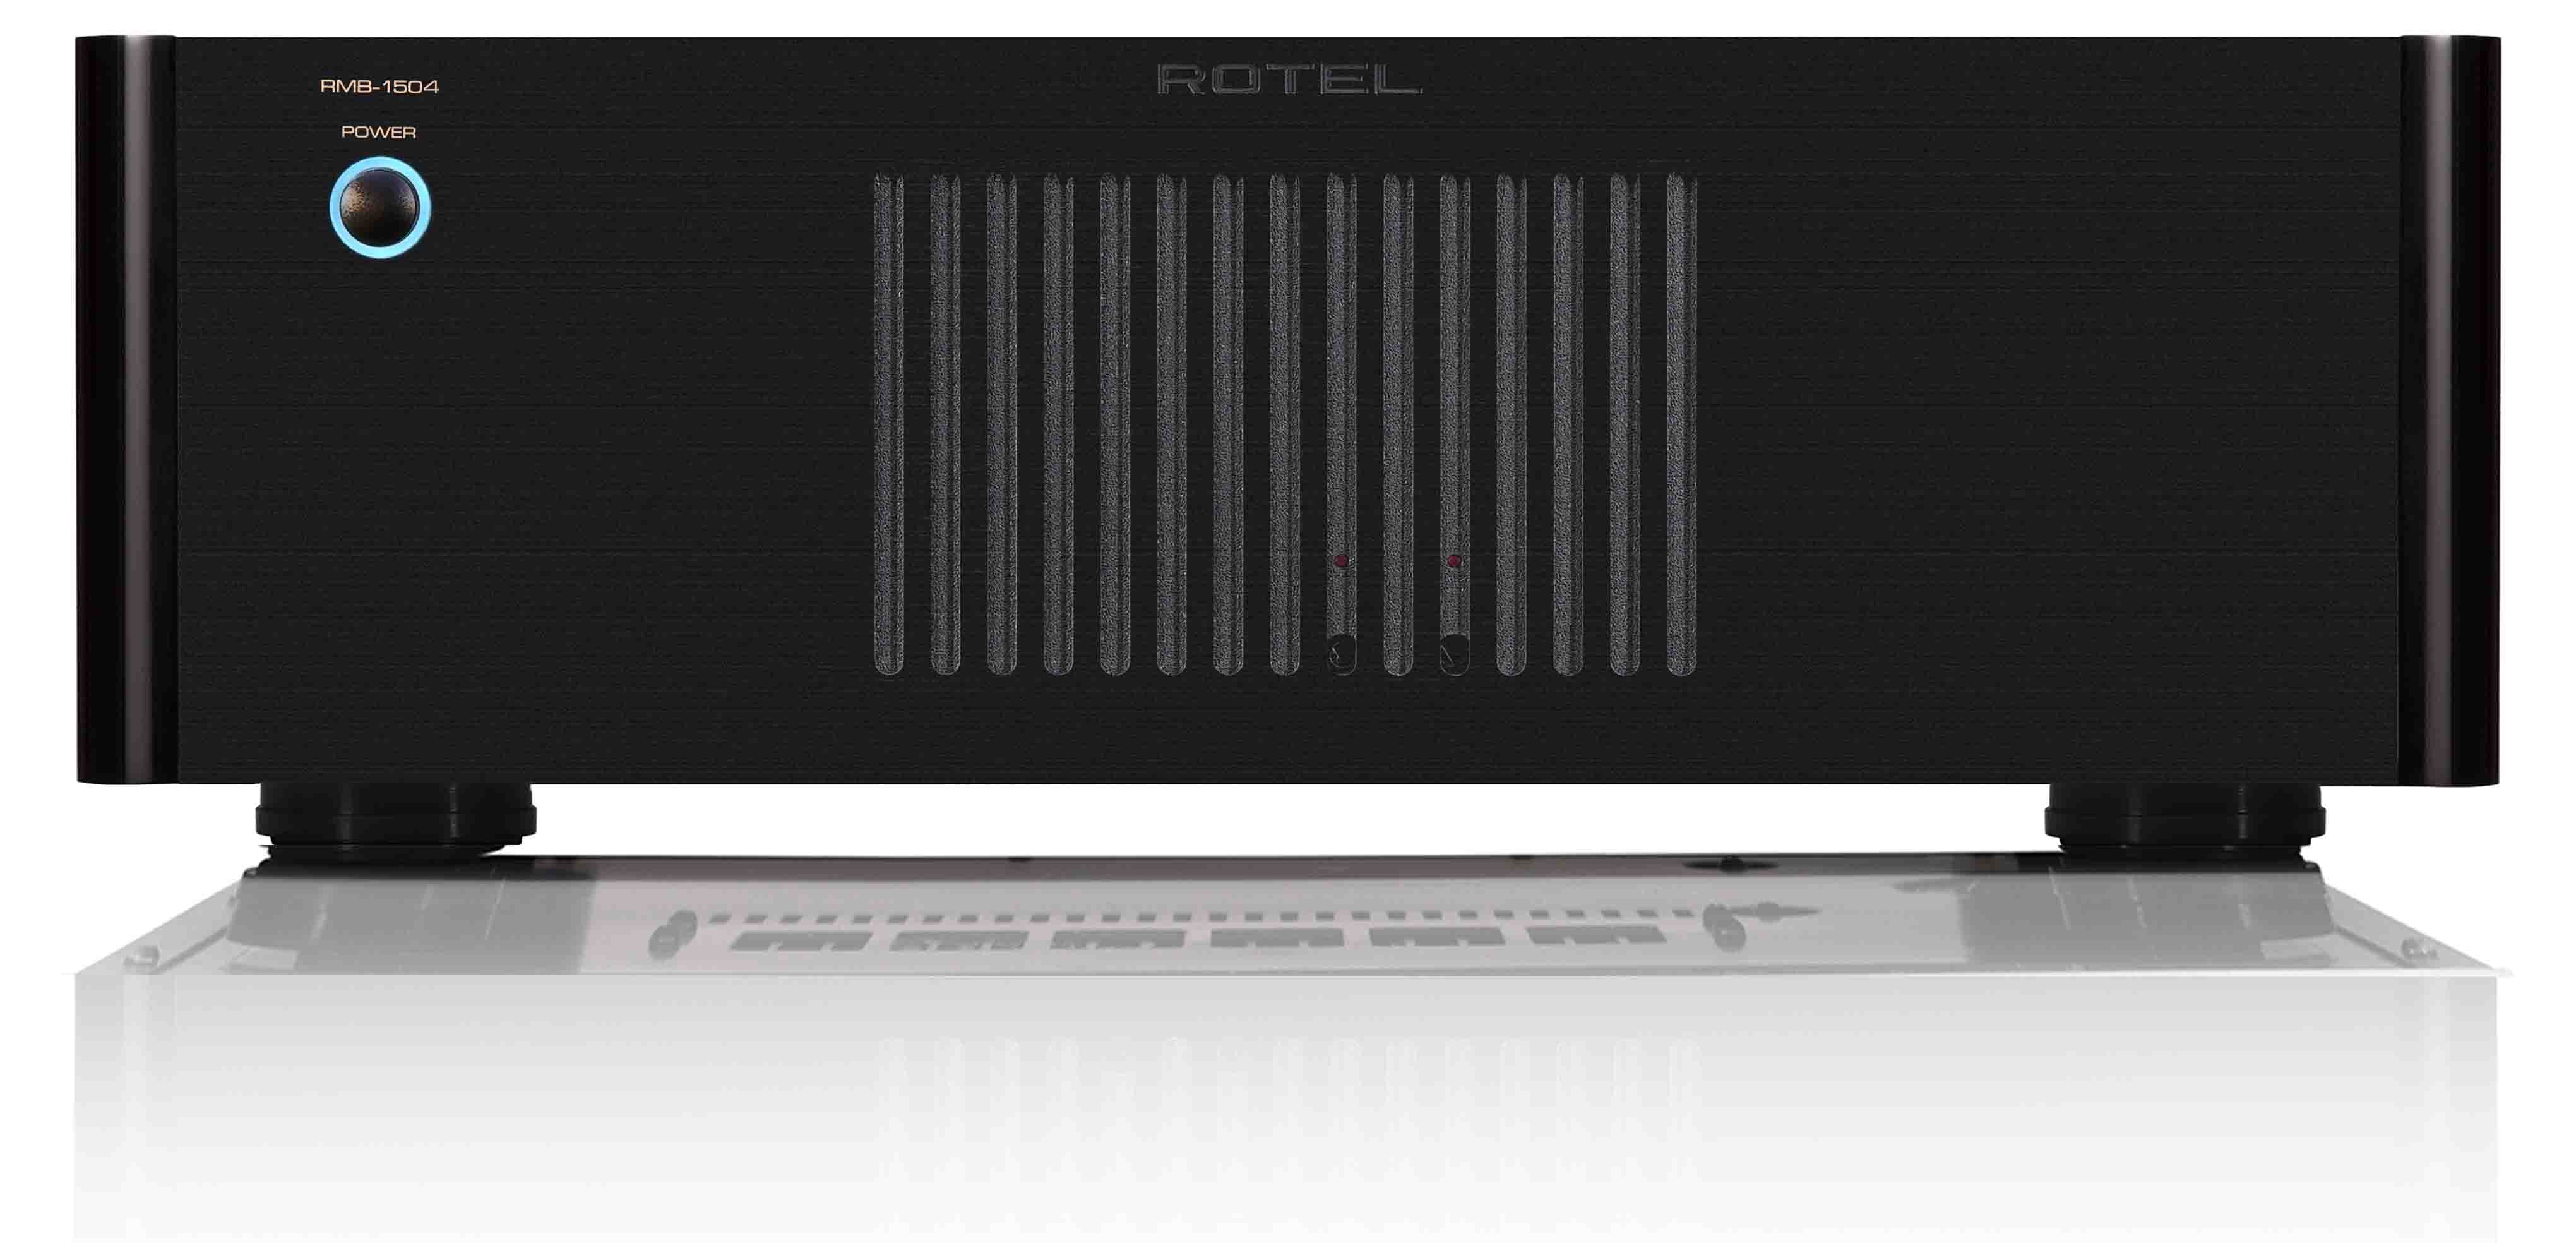 Rotel RMB-1504 Distribution Power Amplifier